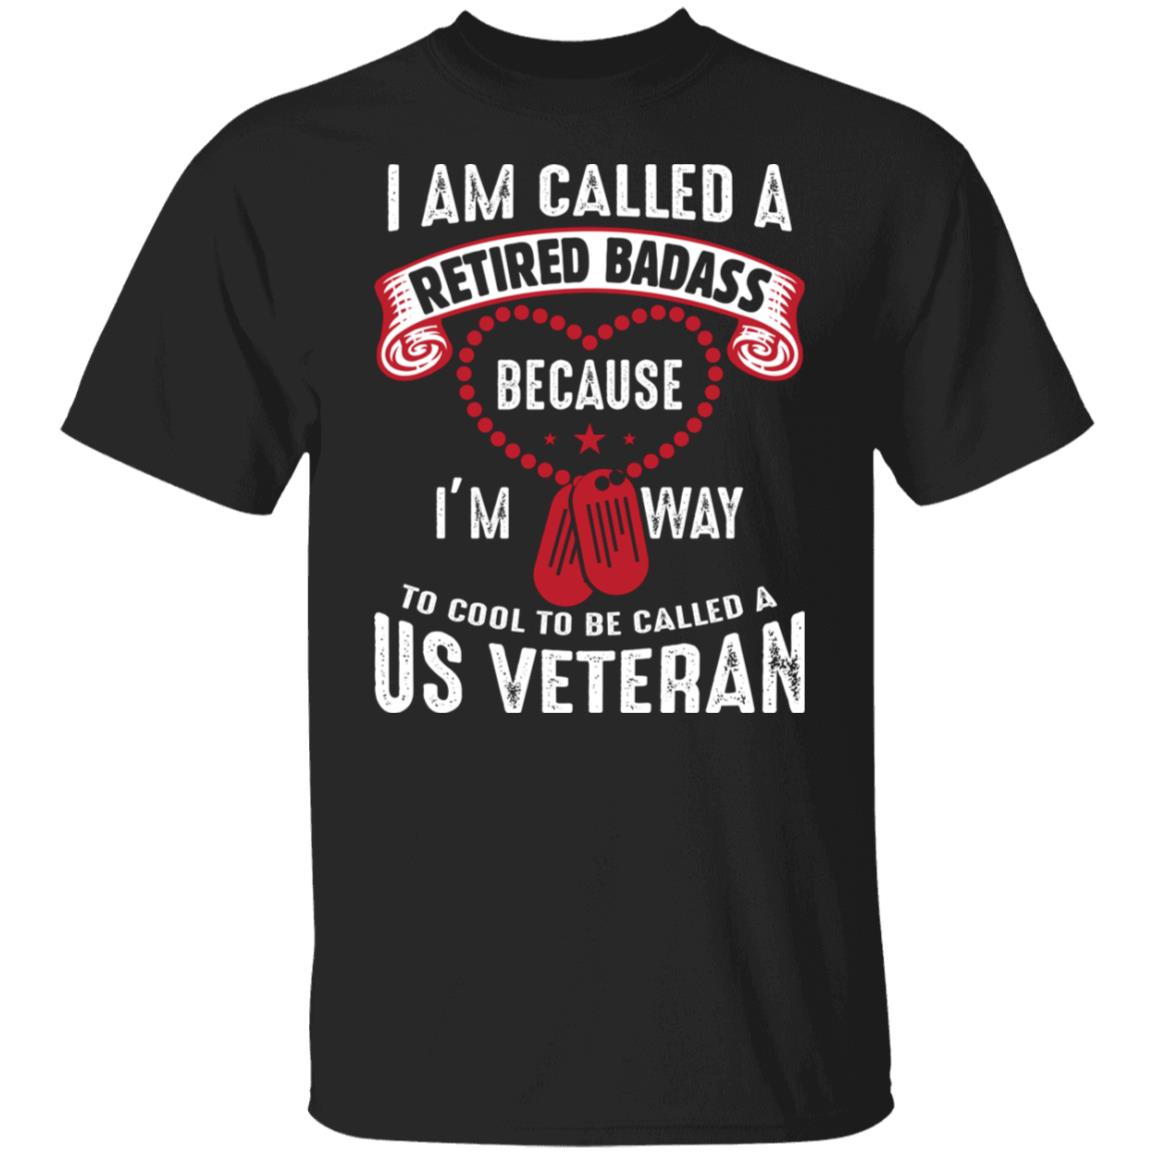 I am Called a Retired Badass Because I'm Way to Cool to be Called a US Veteran Shirt